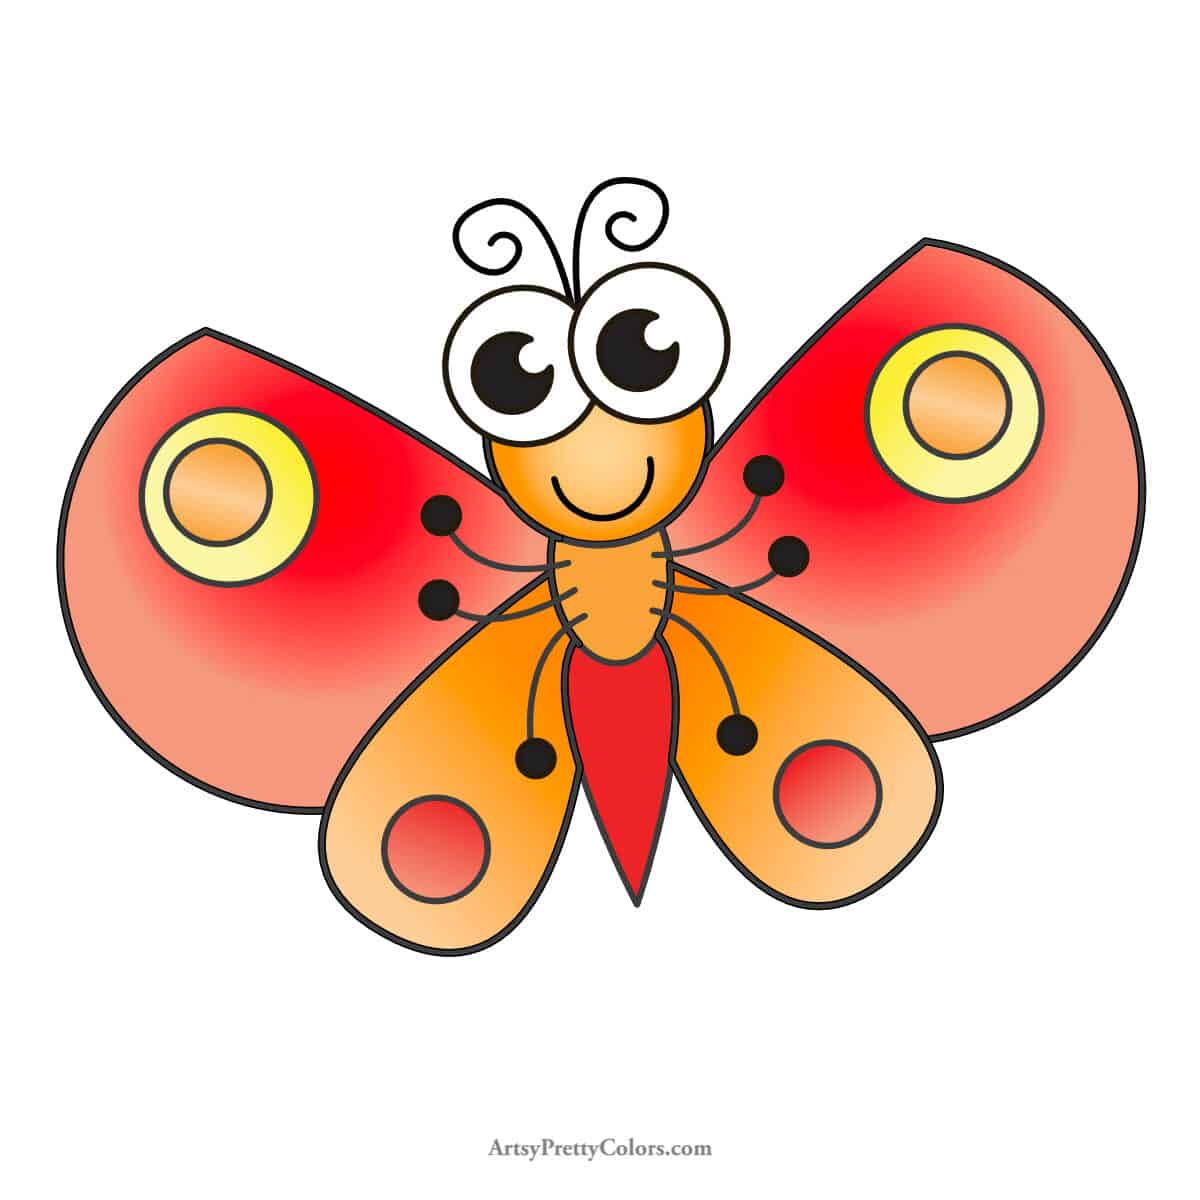 yellow and red cartoon butterfly drawing